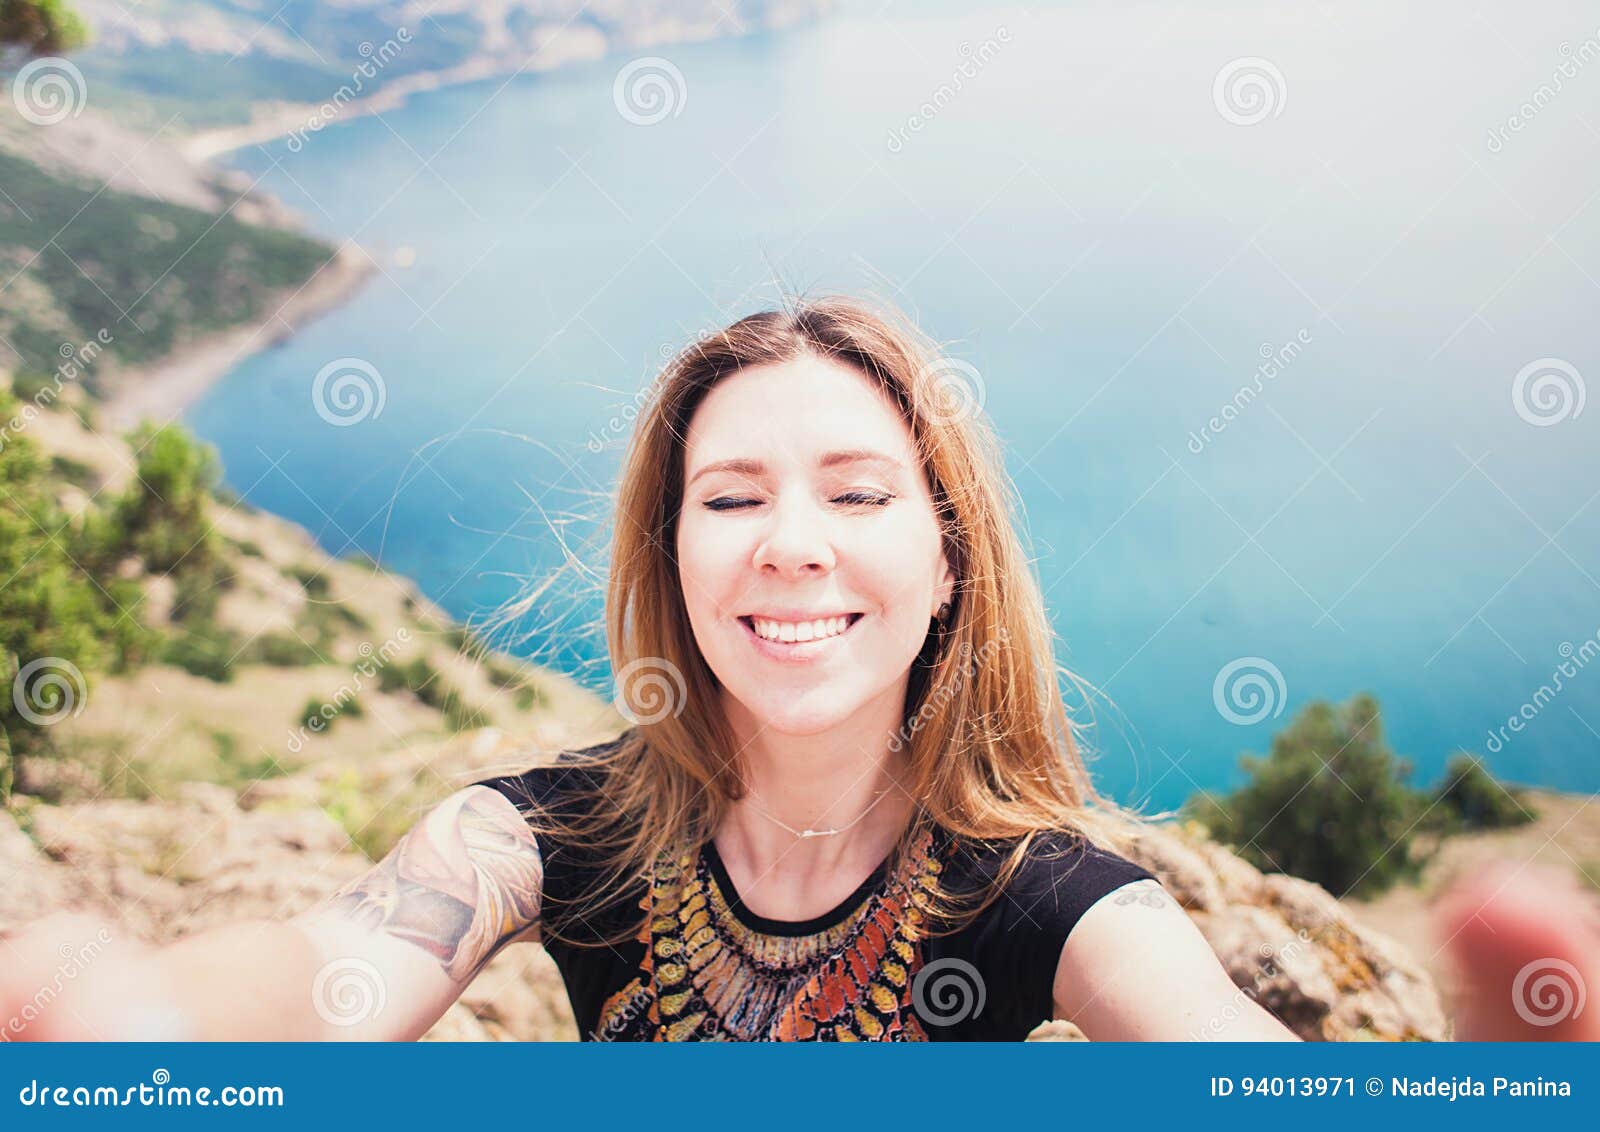 Young Smiling Woman Taking Travel Selfie On Trekking Excursion Day